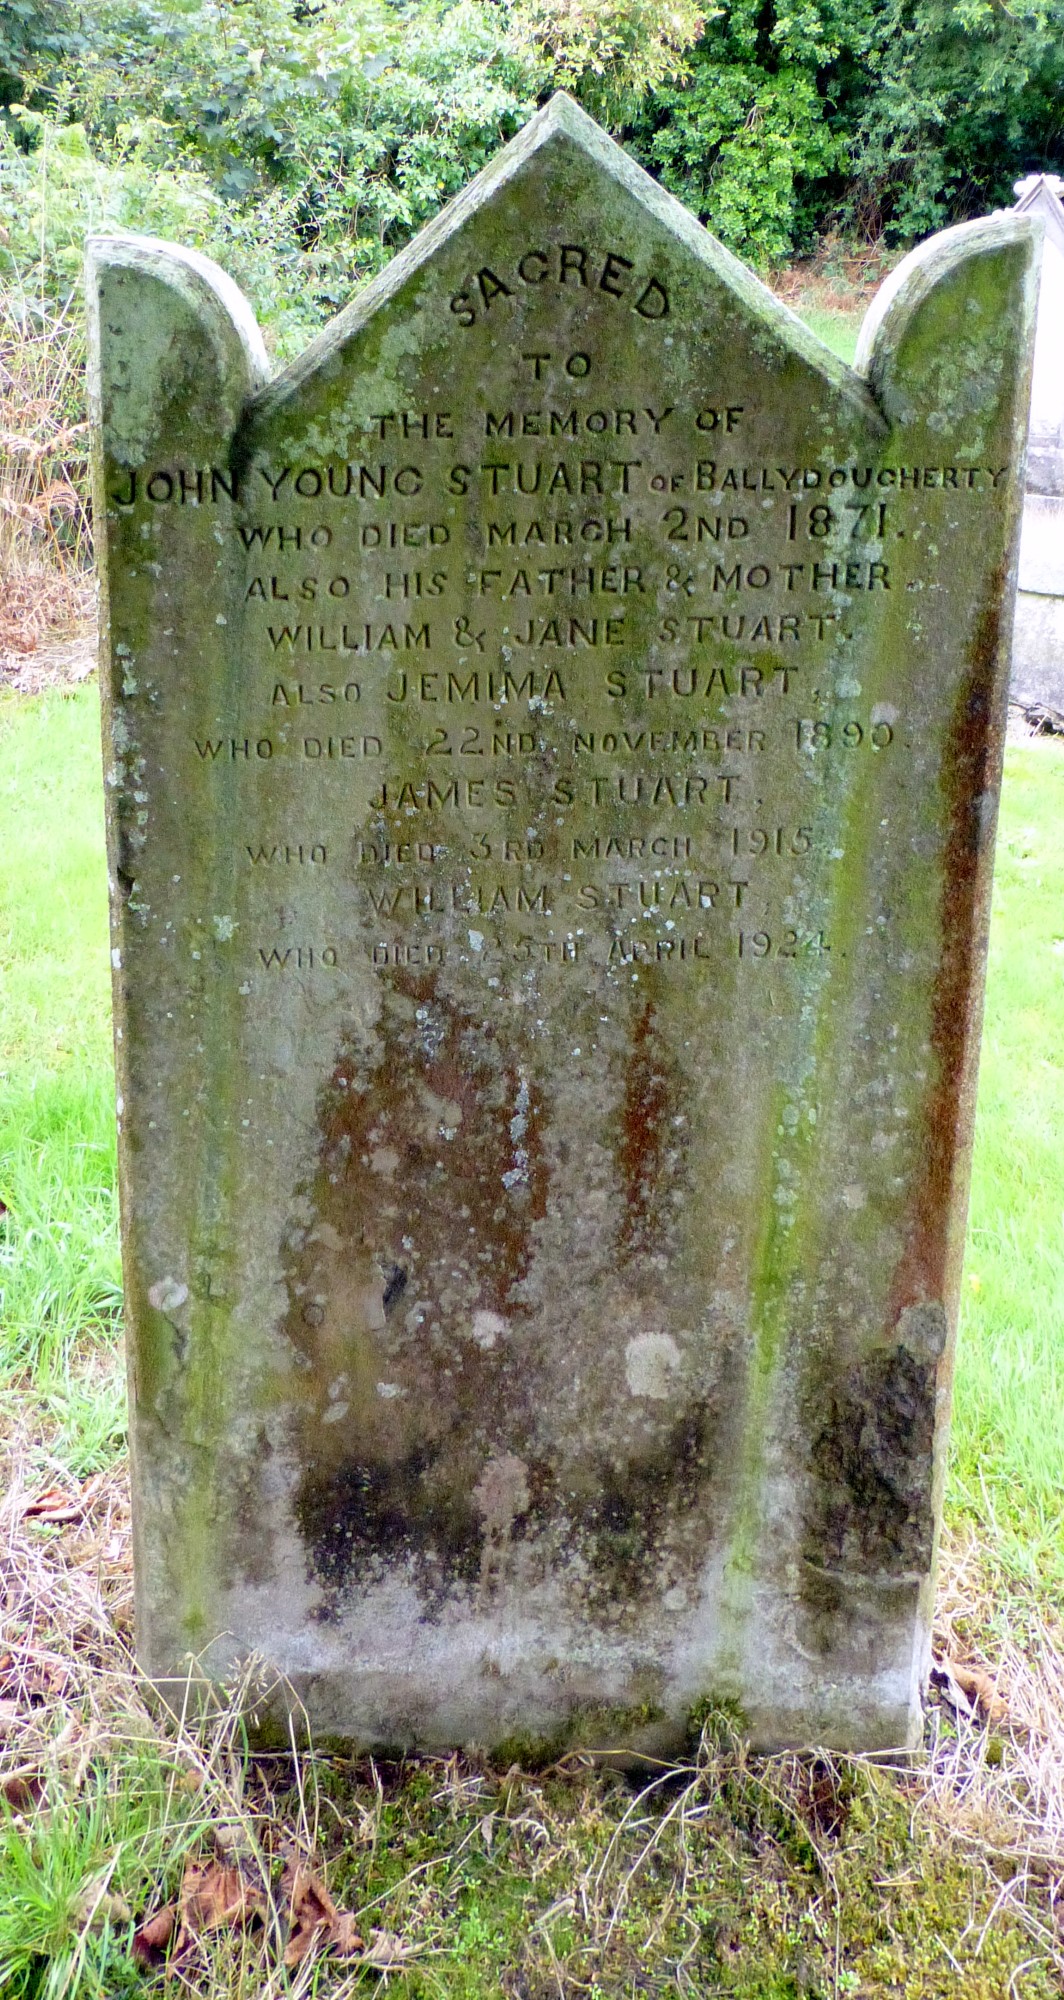 Headstone at Tyrone Ditches Church